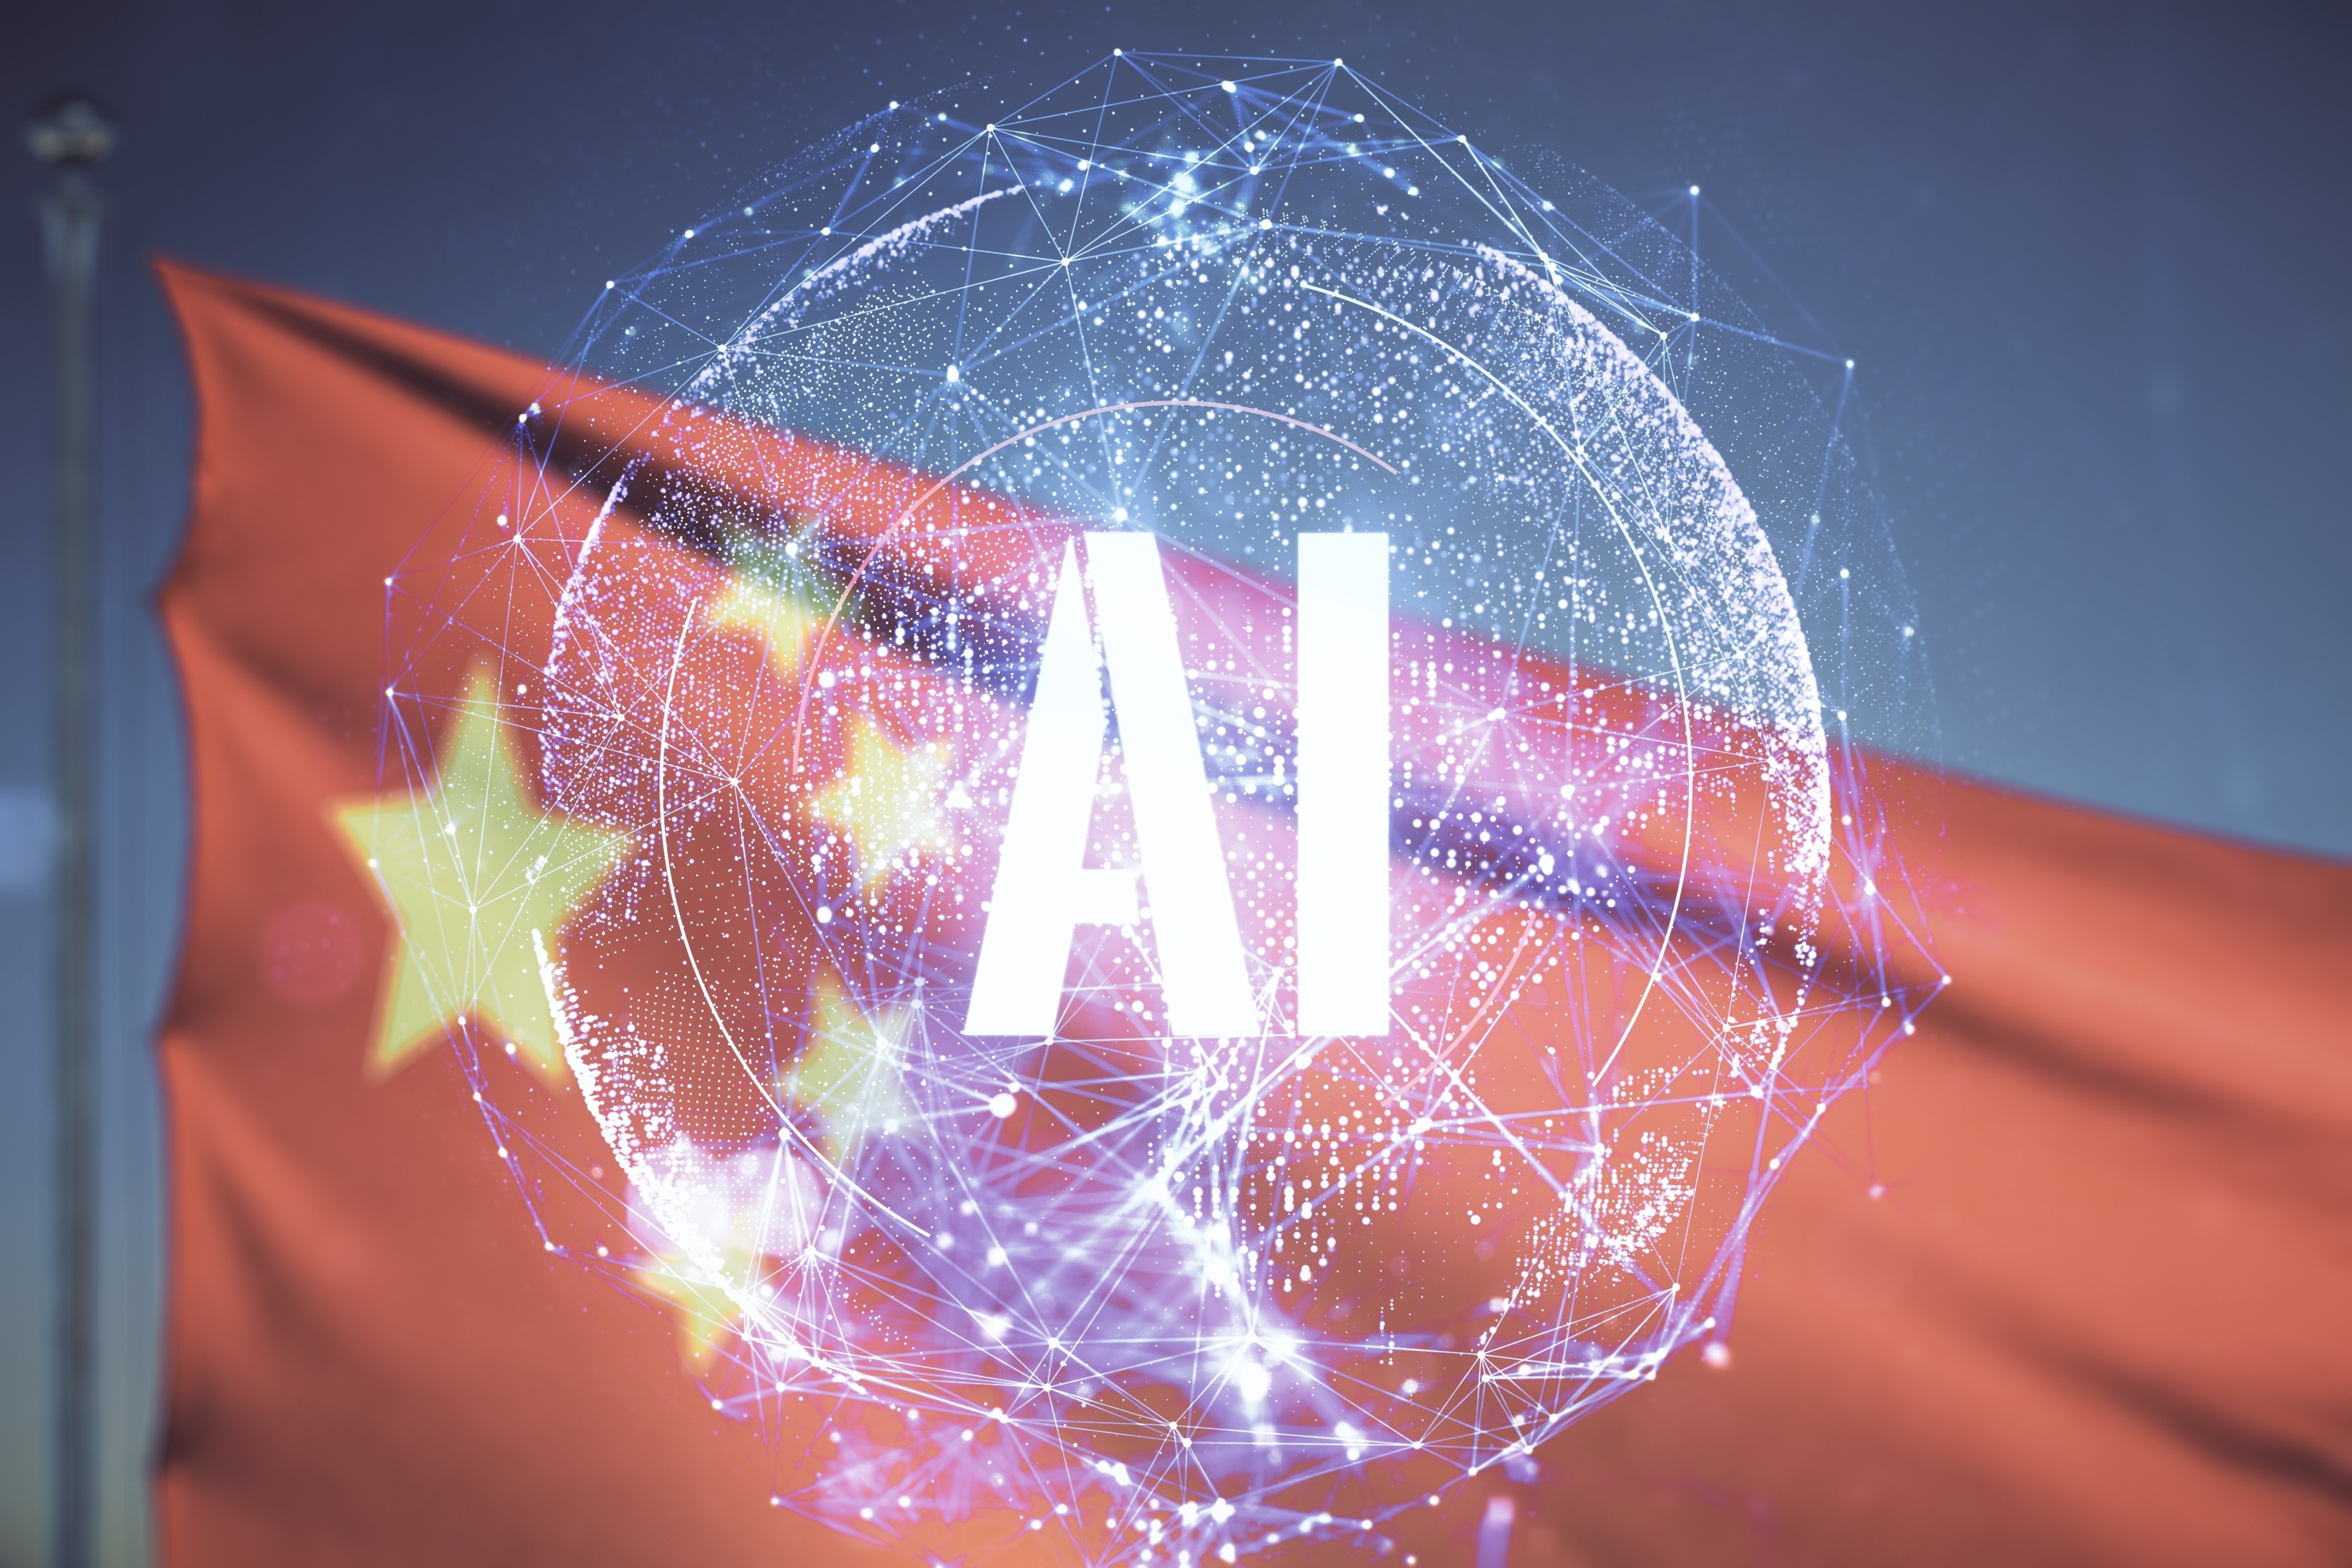 Chinese start-ups such as AIsphere are making headway in generative AI in a bid to take on overseas rivals in the field. Photo: Shutterstock